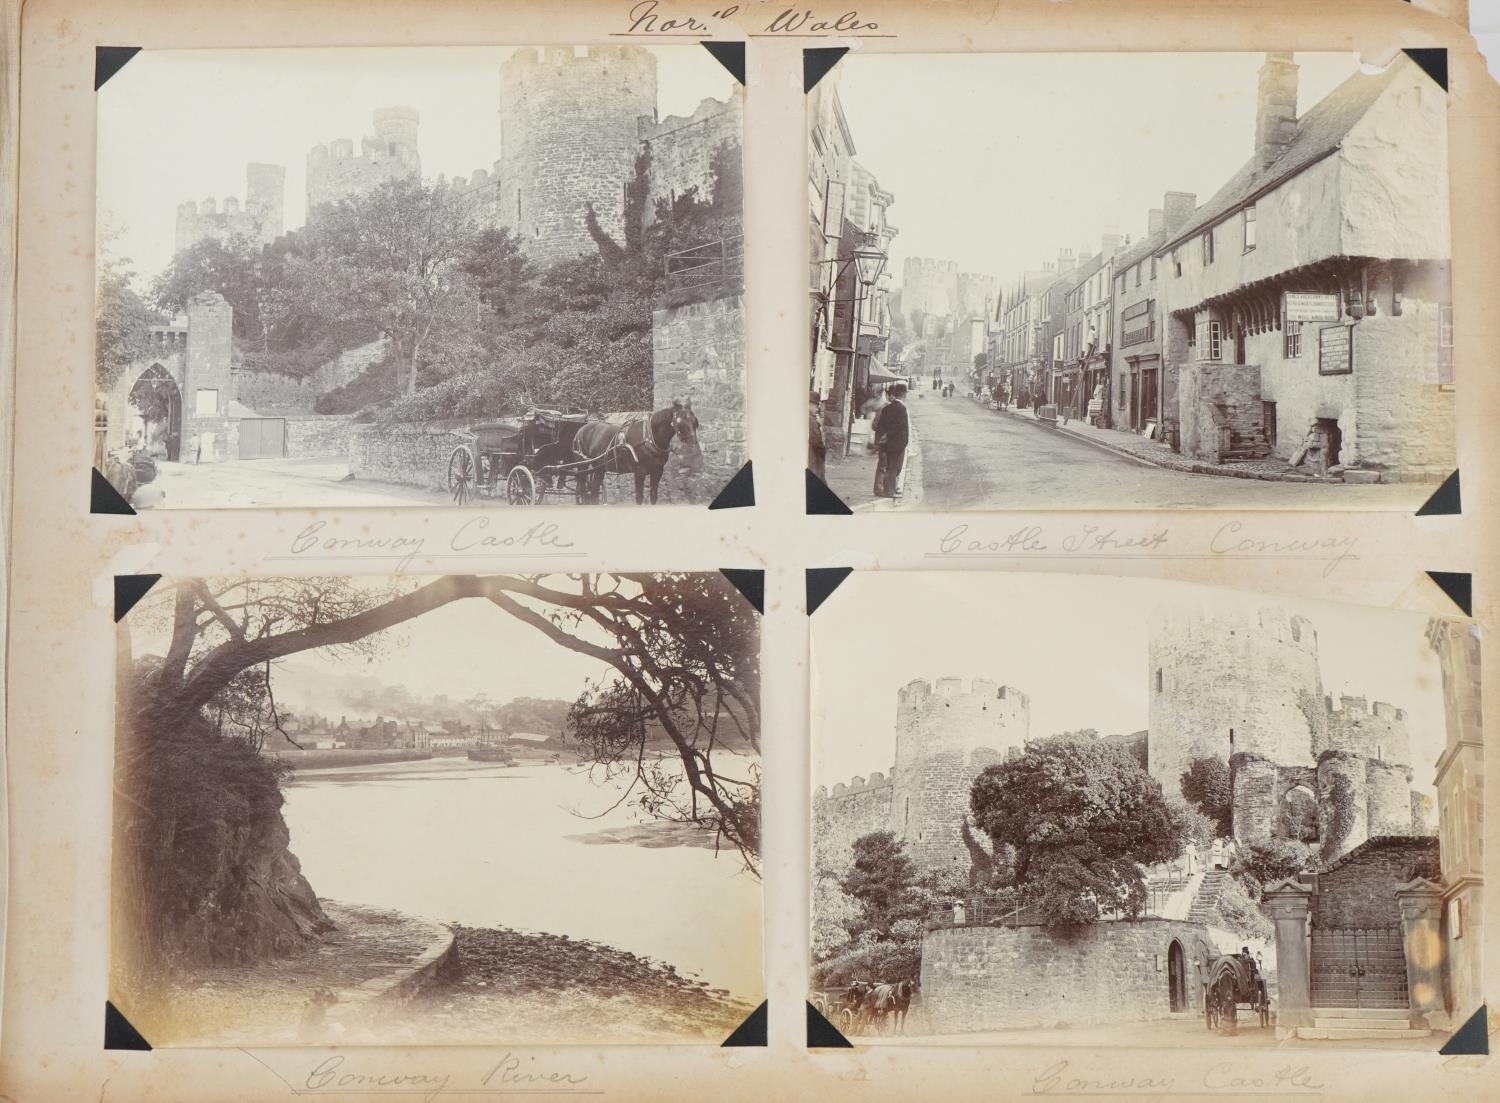 Early 20th century black and white photographs arranged in an album including Staffordshire, - Image 26 of 40